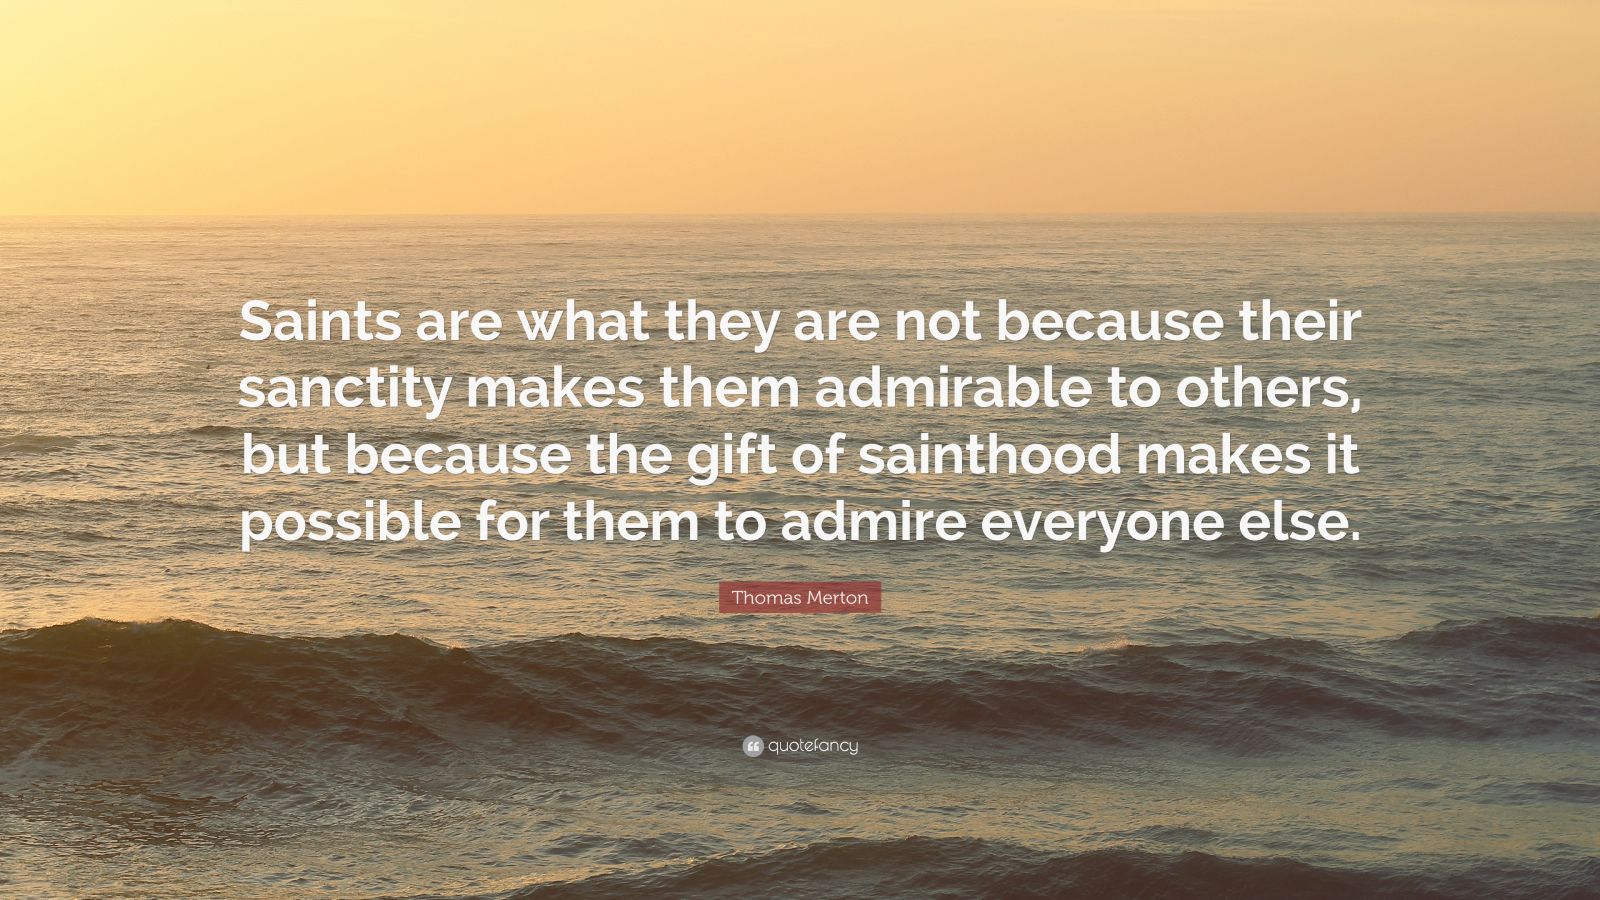 Thomas Merton Quote: "Saints are what they are not because their sanctity makes them admirable ...